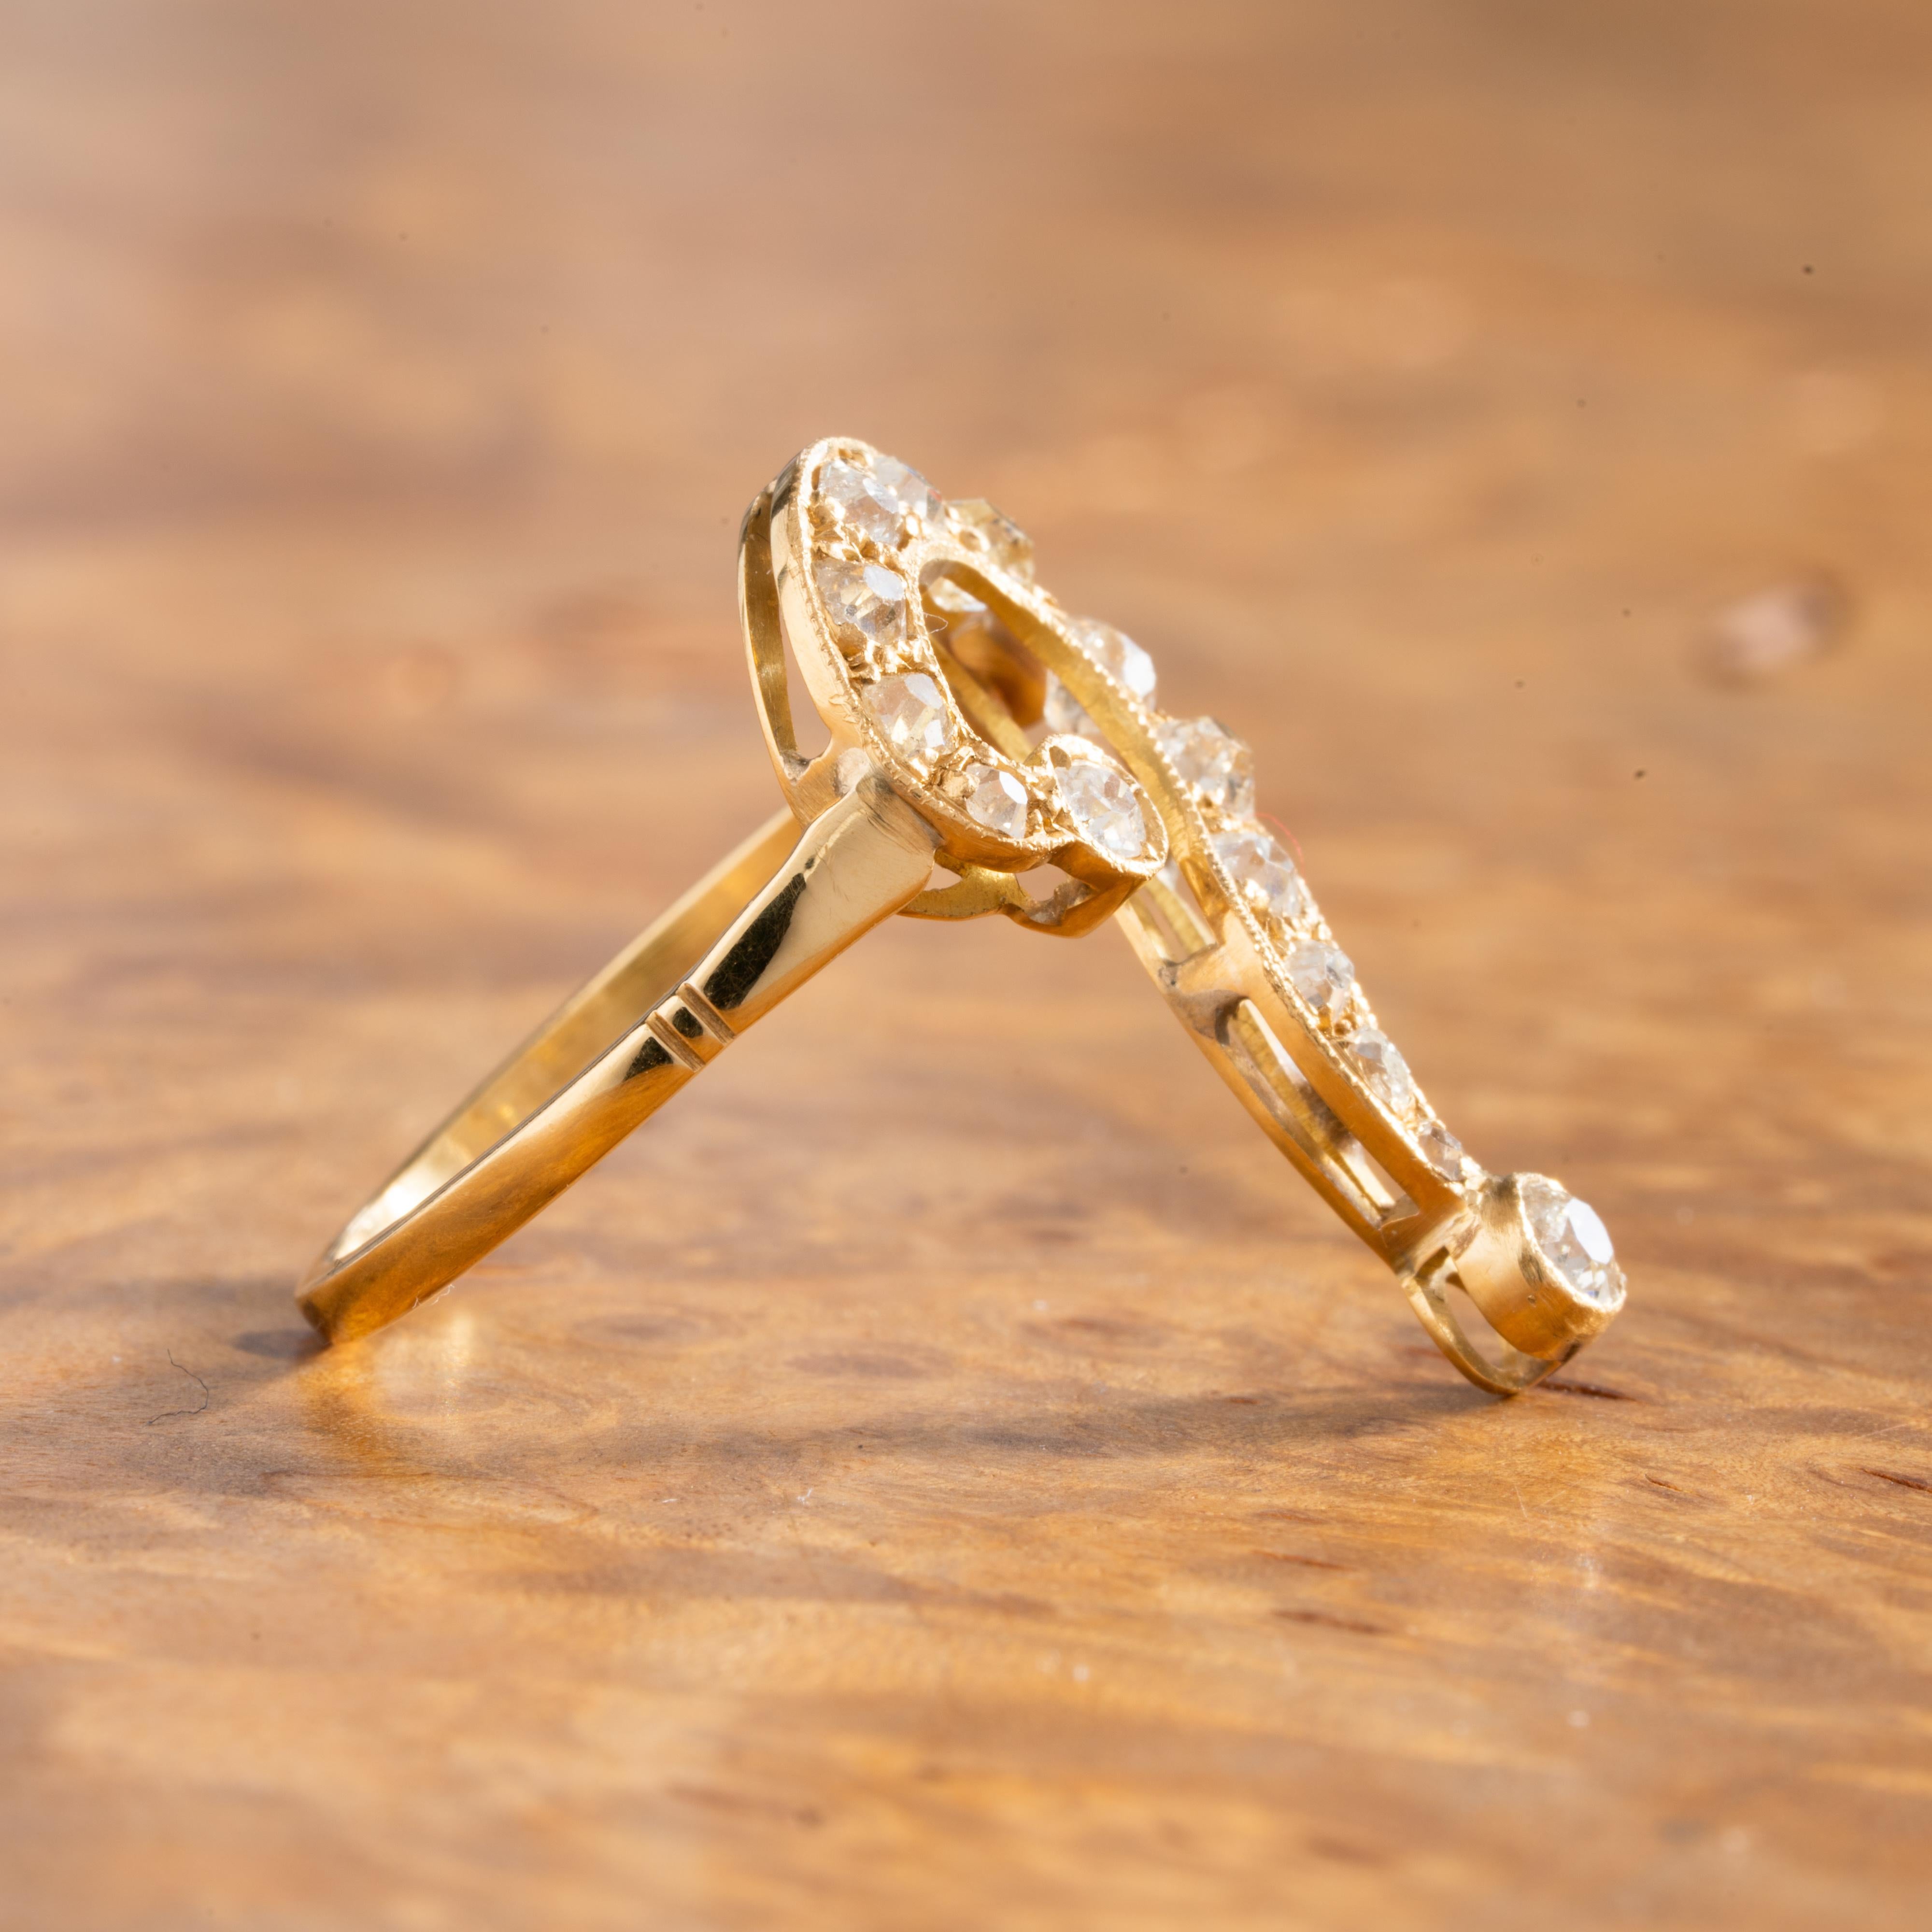 Art Nouveau 18K Yellow Gold 1.50ct Old Mine Cut Question Mark Ring c.1900

Period: Victorian
Year: 1850s
Material: 18k Yellow Gold, Old Cut Diamonds
Weight: 2.90 grams
Size: 6.5
Condition: Very Good Antique Condition


We offer free ring sizing.